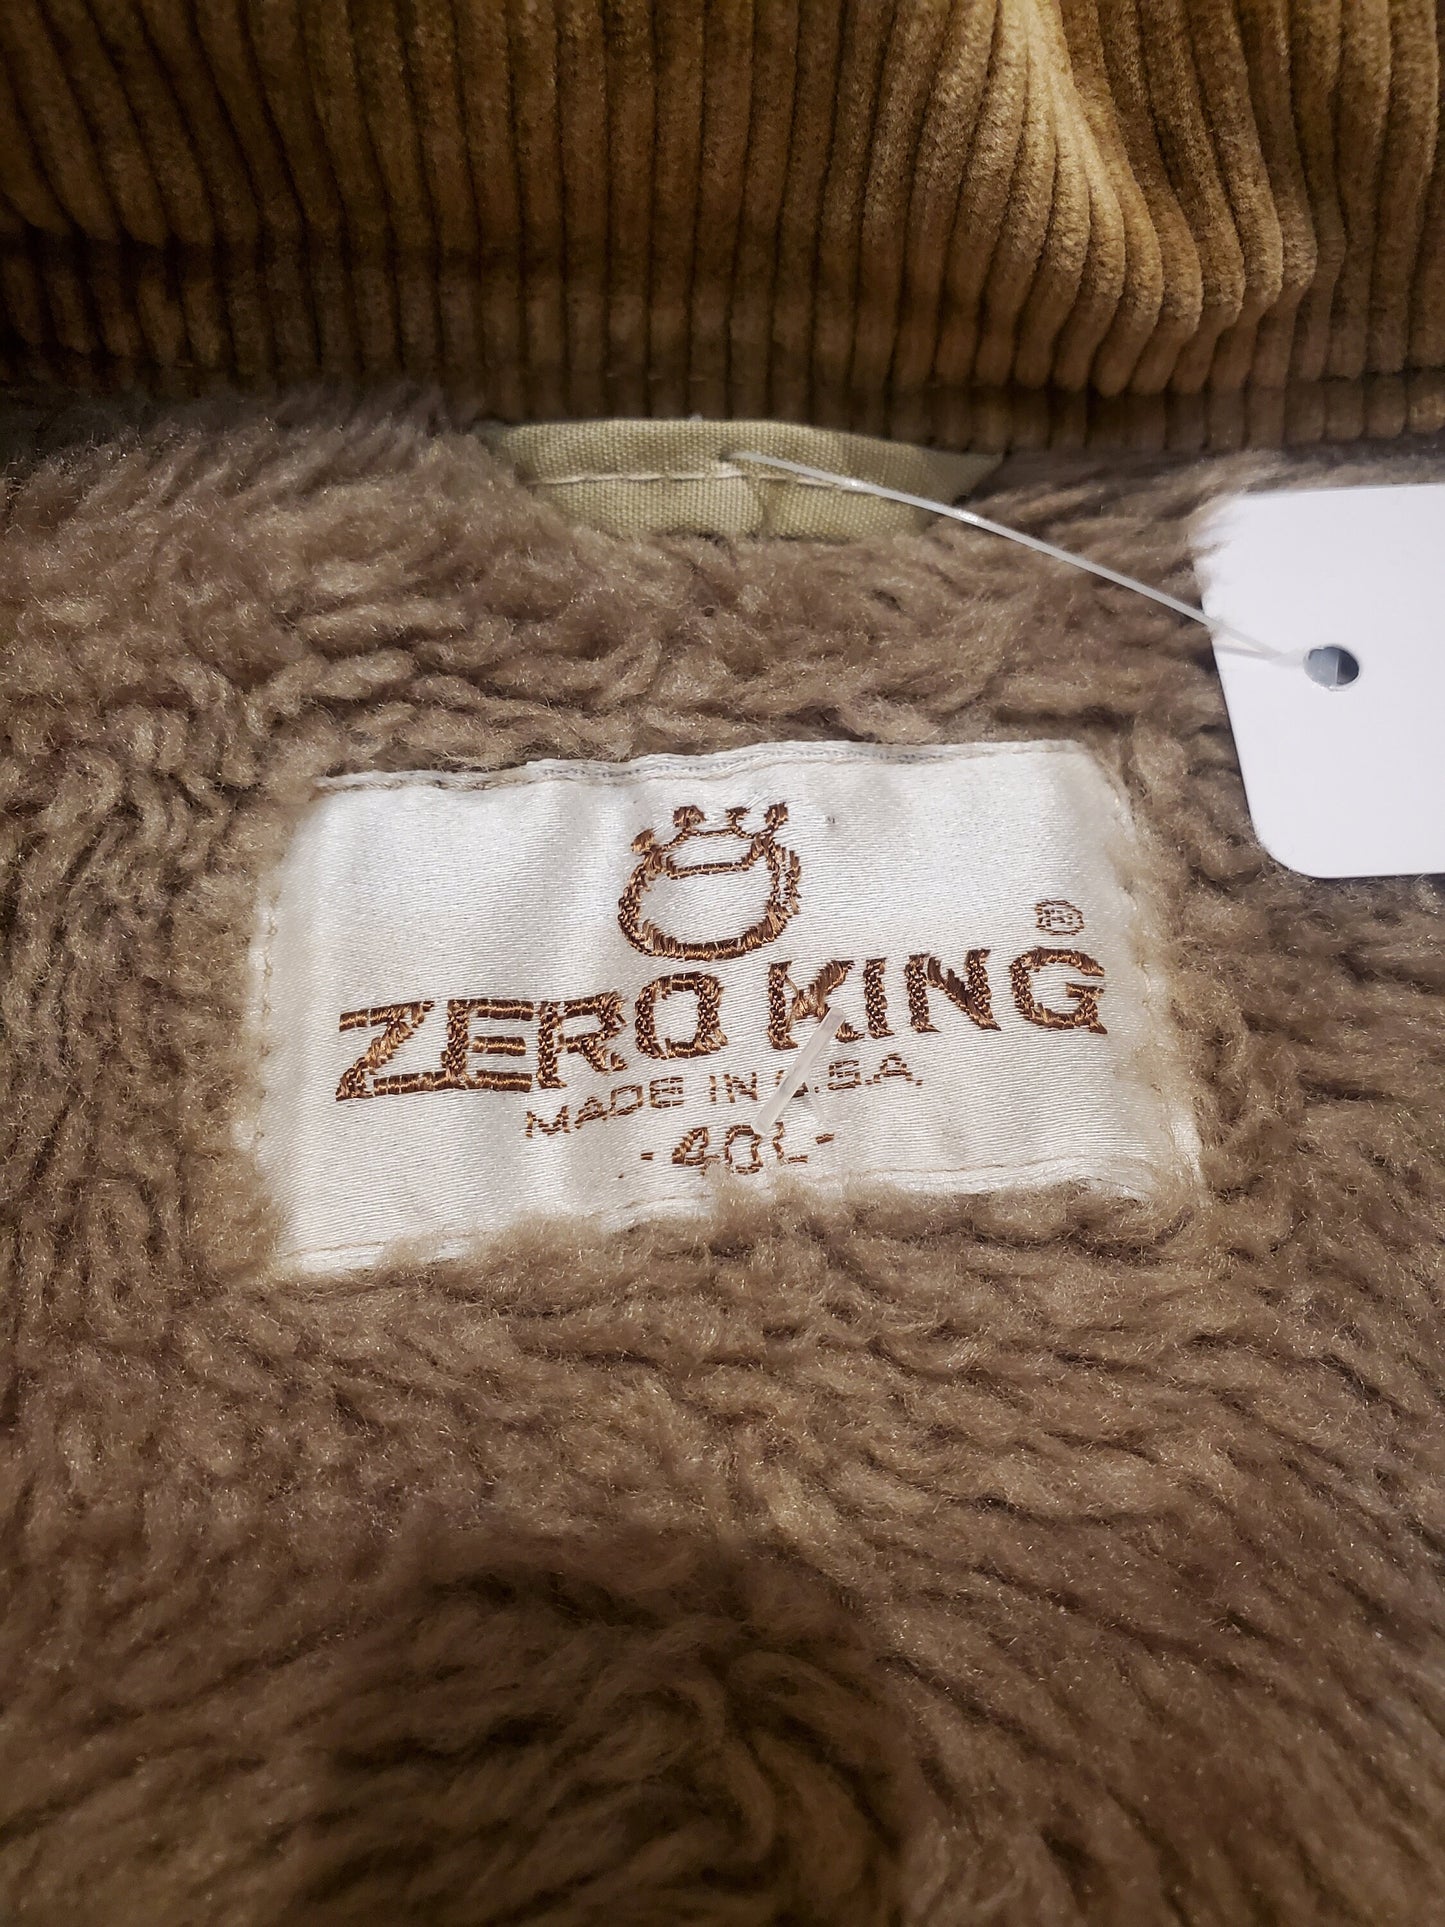 1980s Zero King Fleece Lined Jacket Made in USA Size M/L